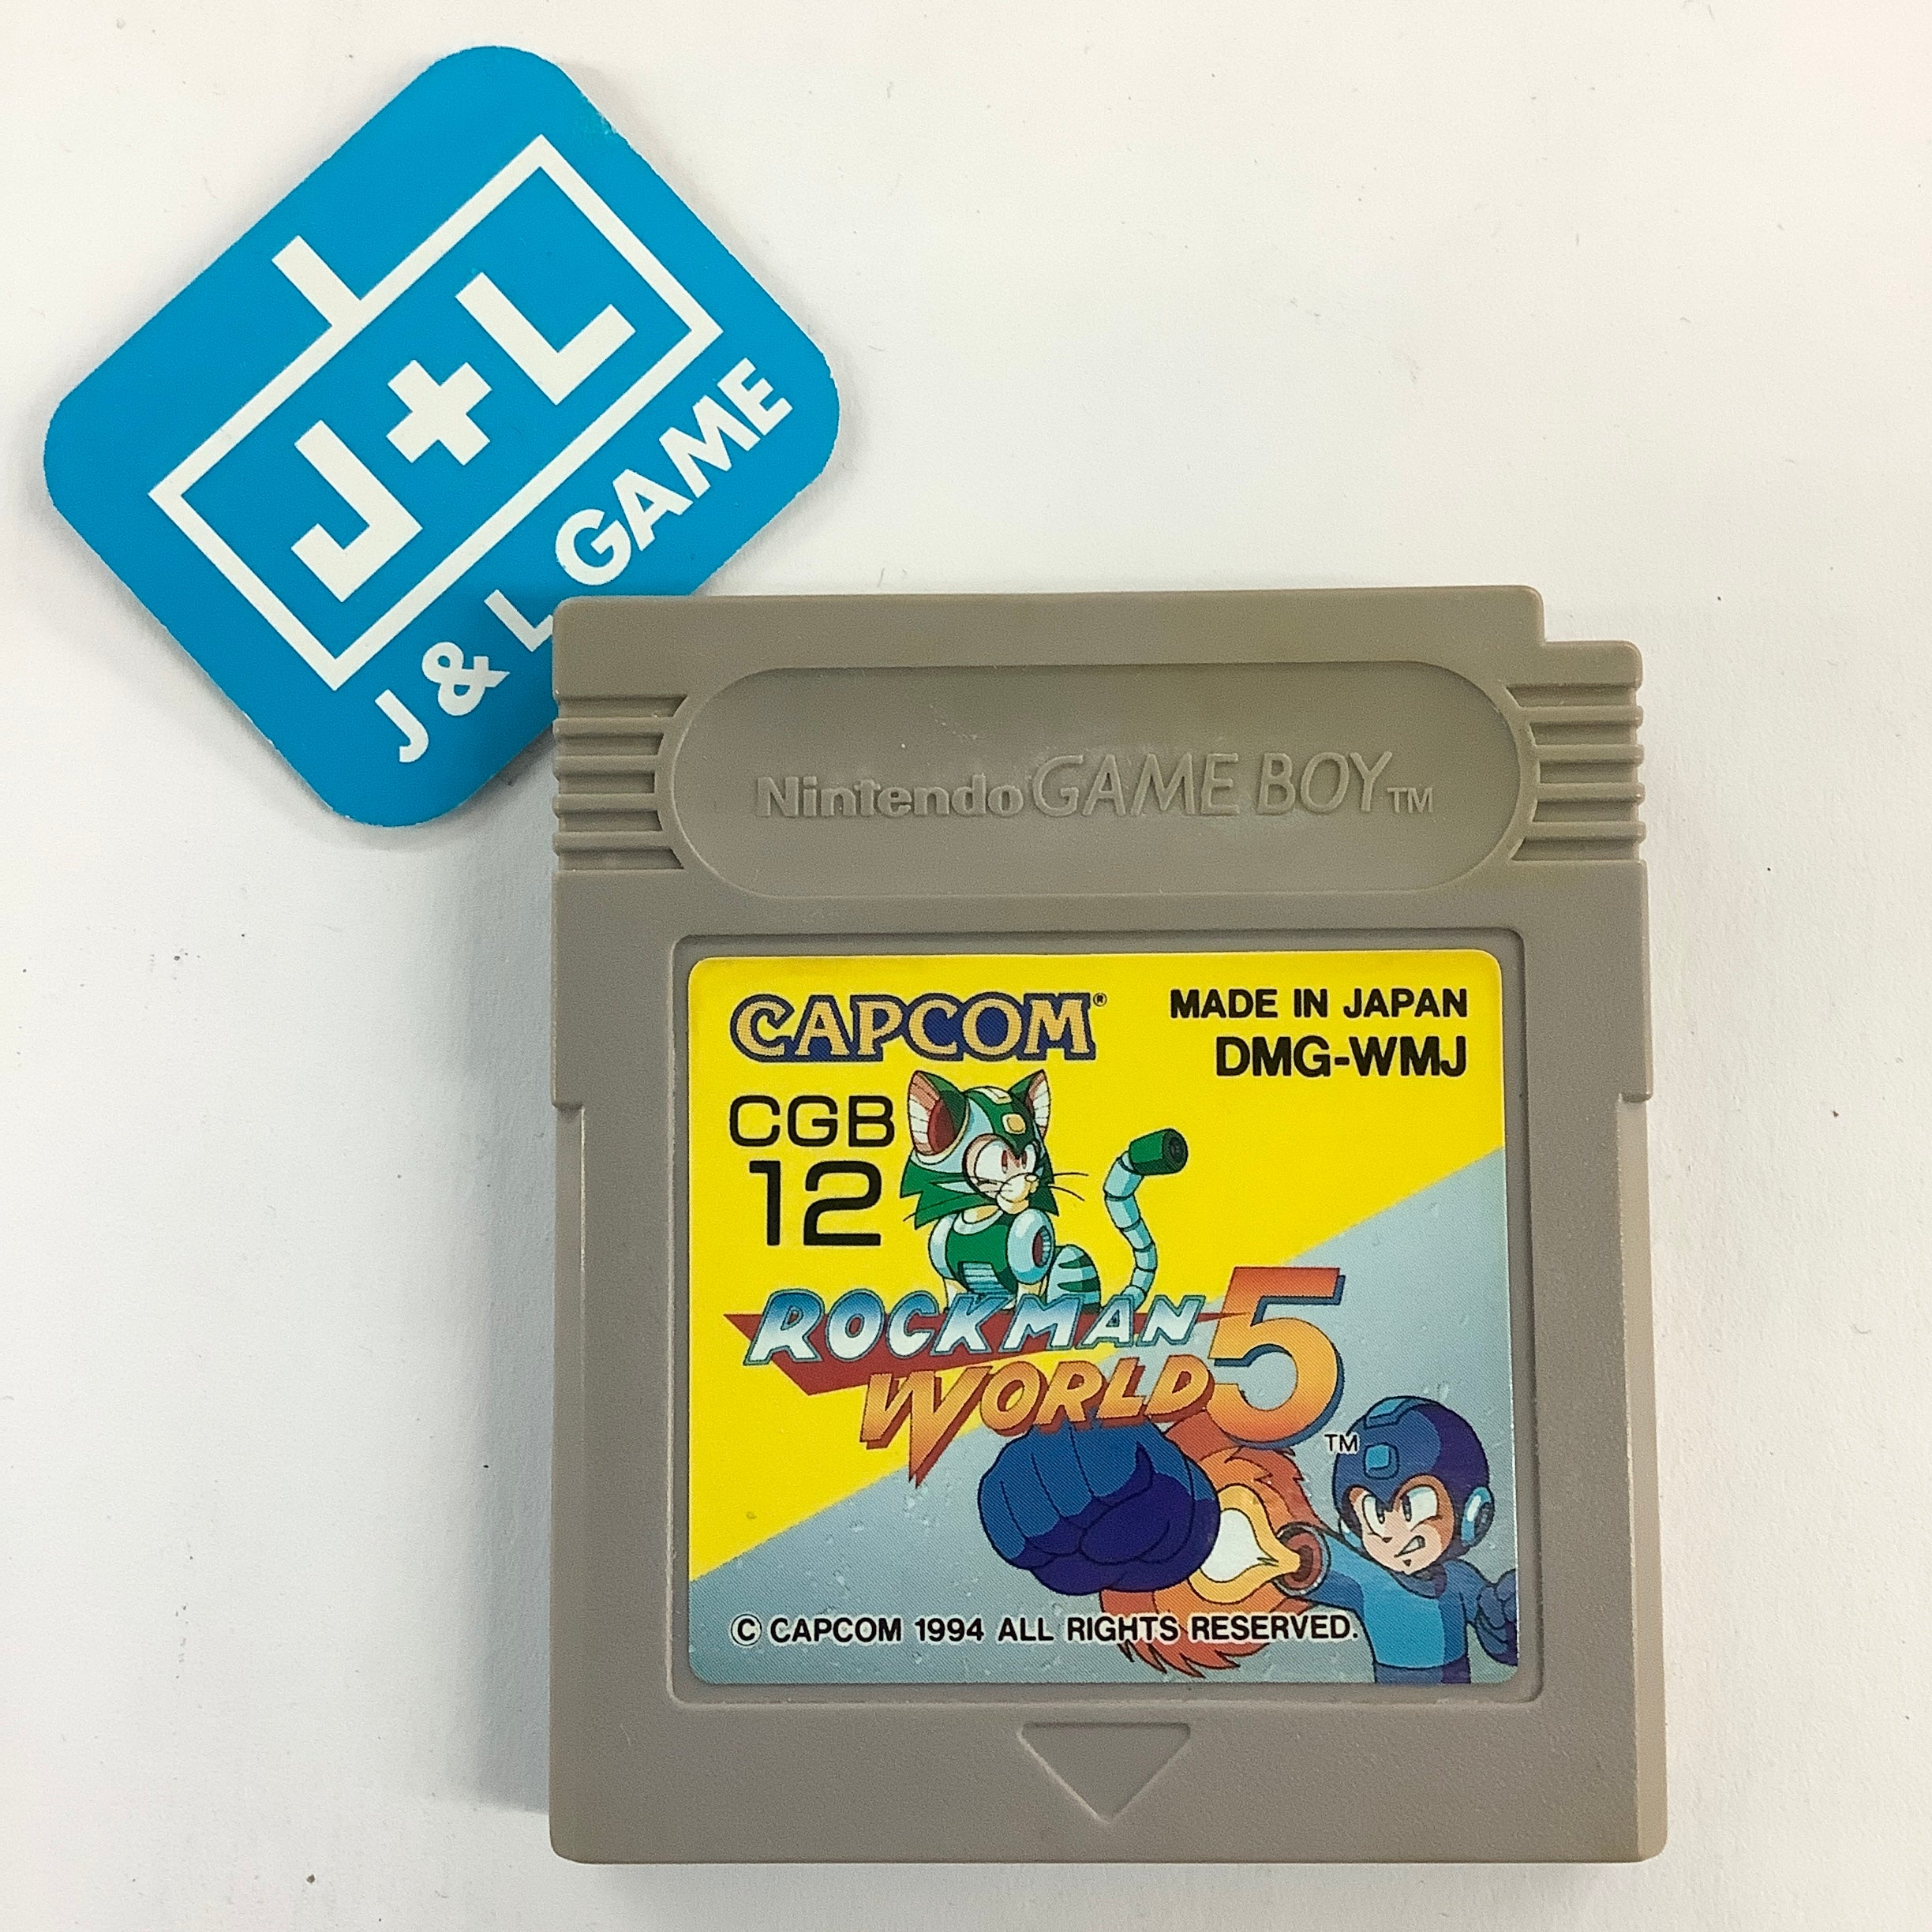 RockMan World 5 - (GB) Game Boy (Japanese Import) [Pre-Owned] Video Games Capcom   